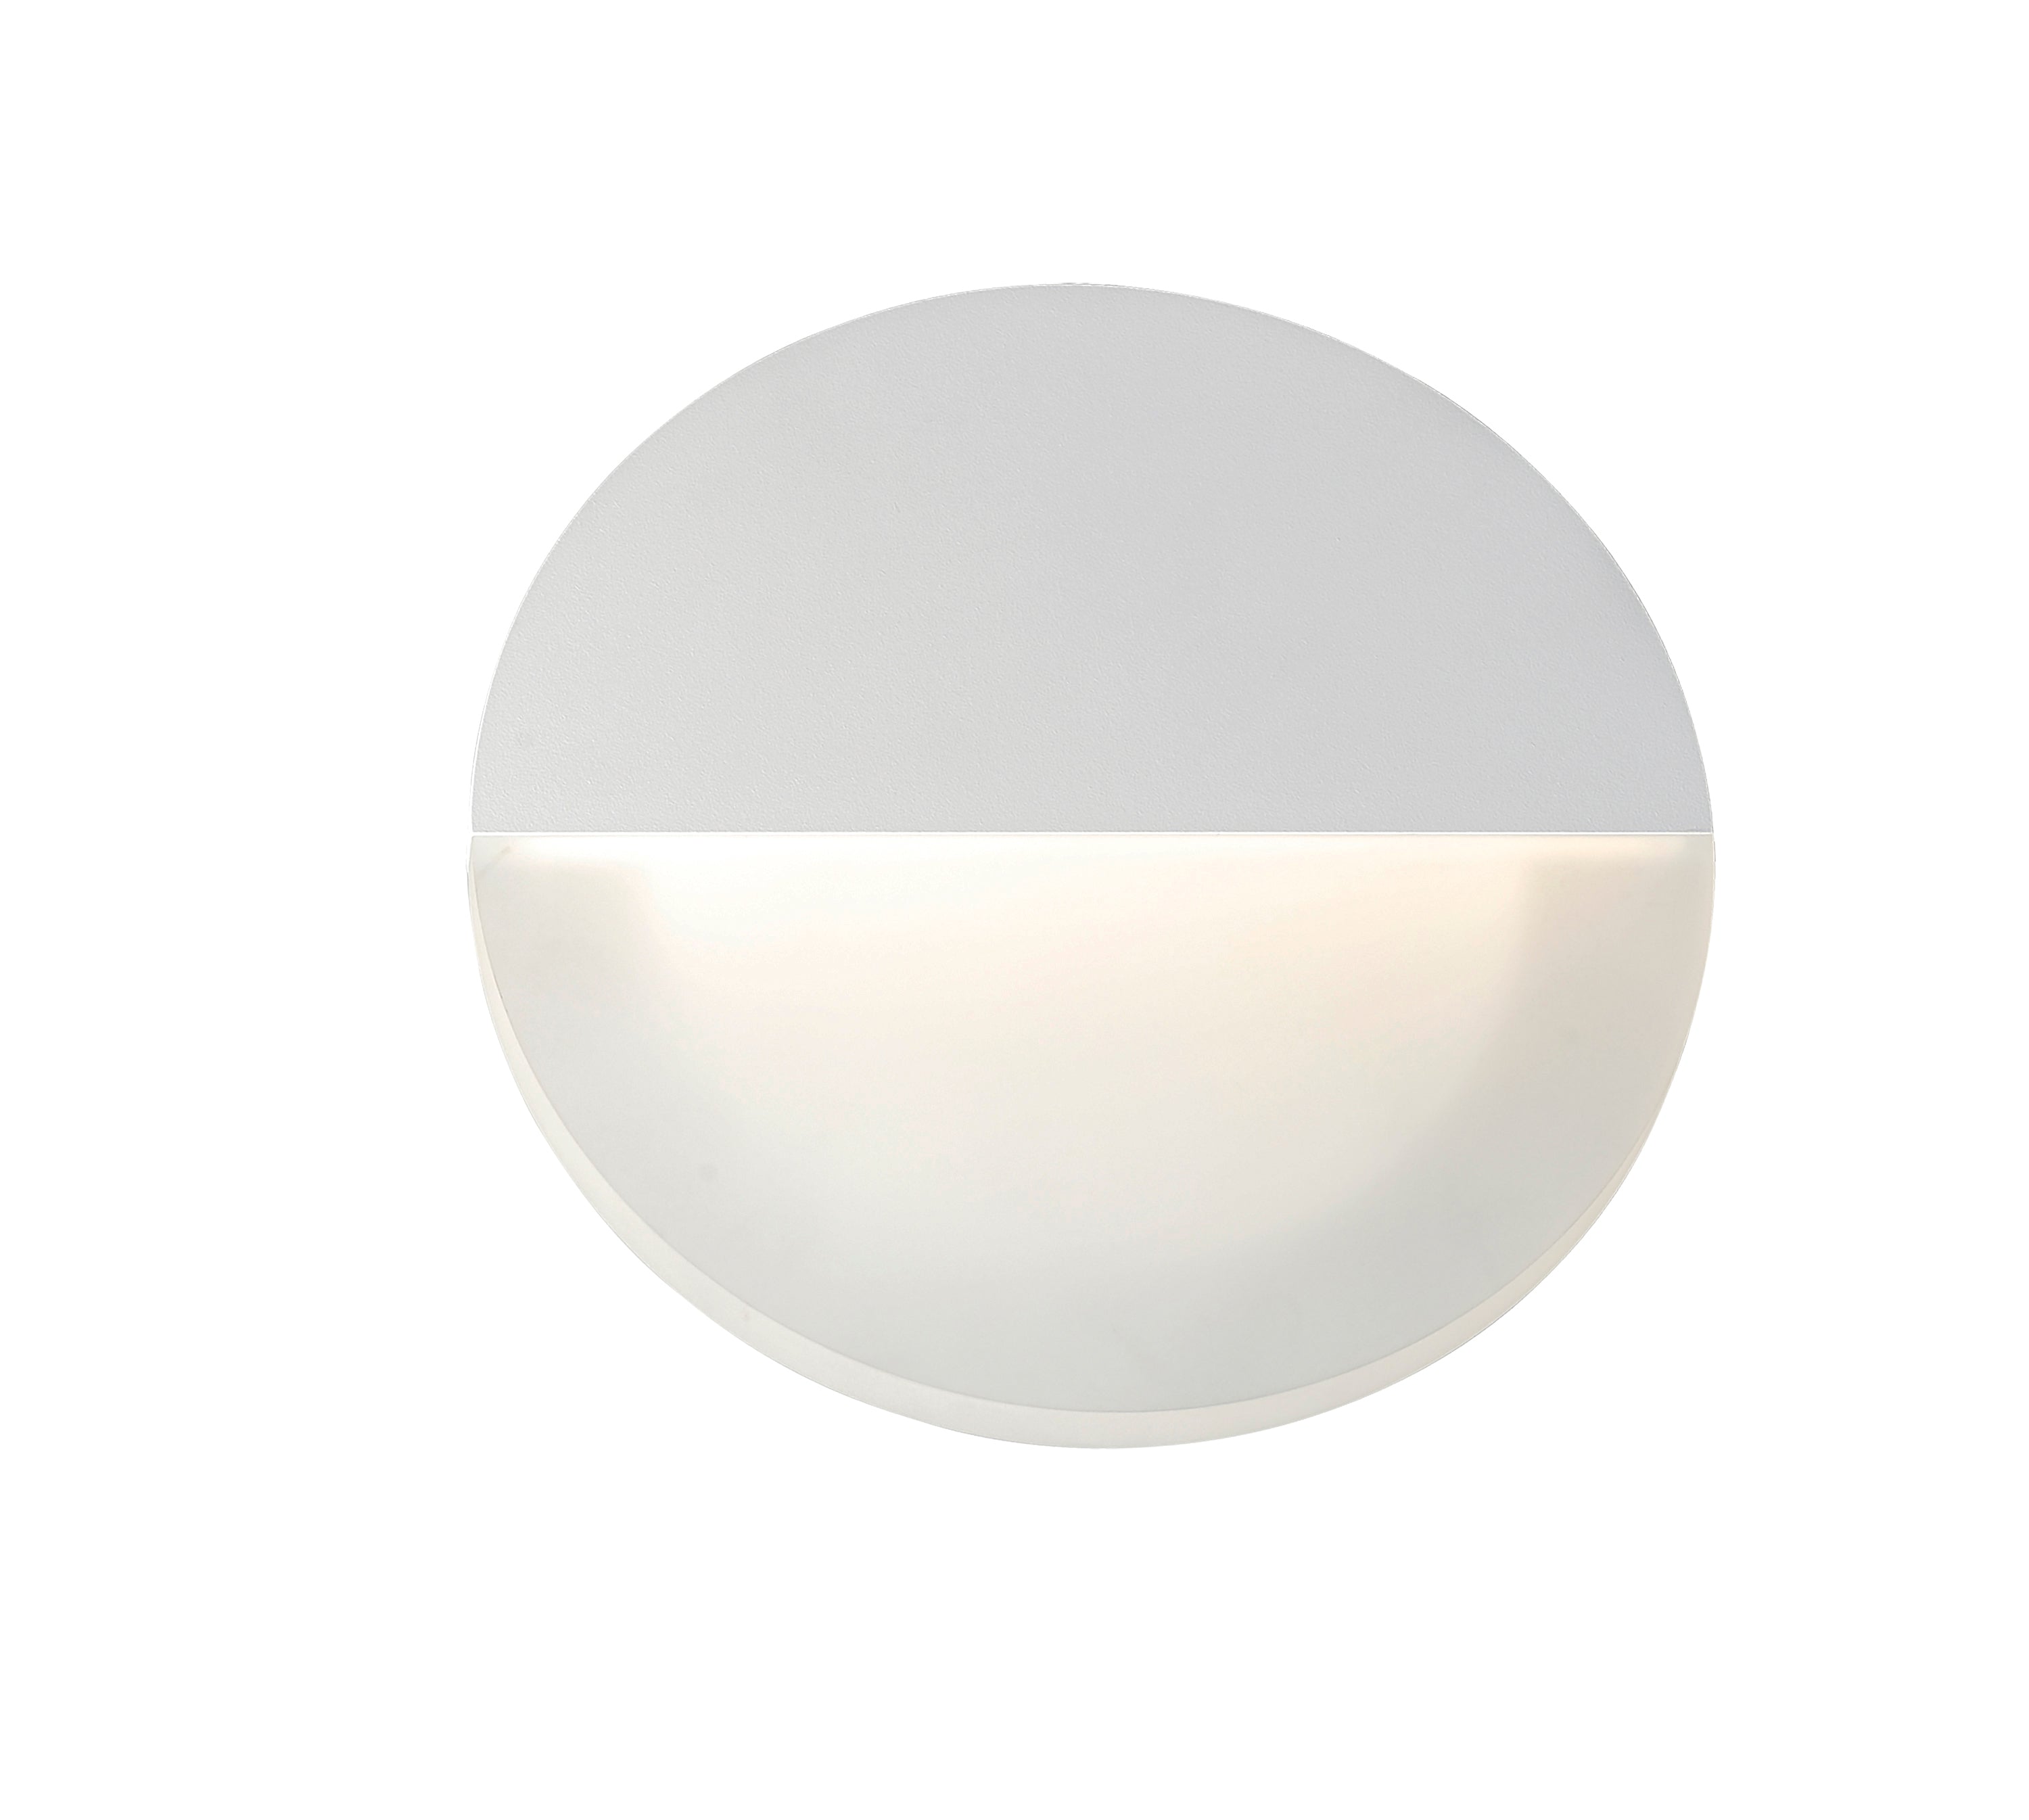 Alumilux Glow-Wall Sconce Wall Light Fixtures ET2 0x10x10 White 